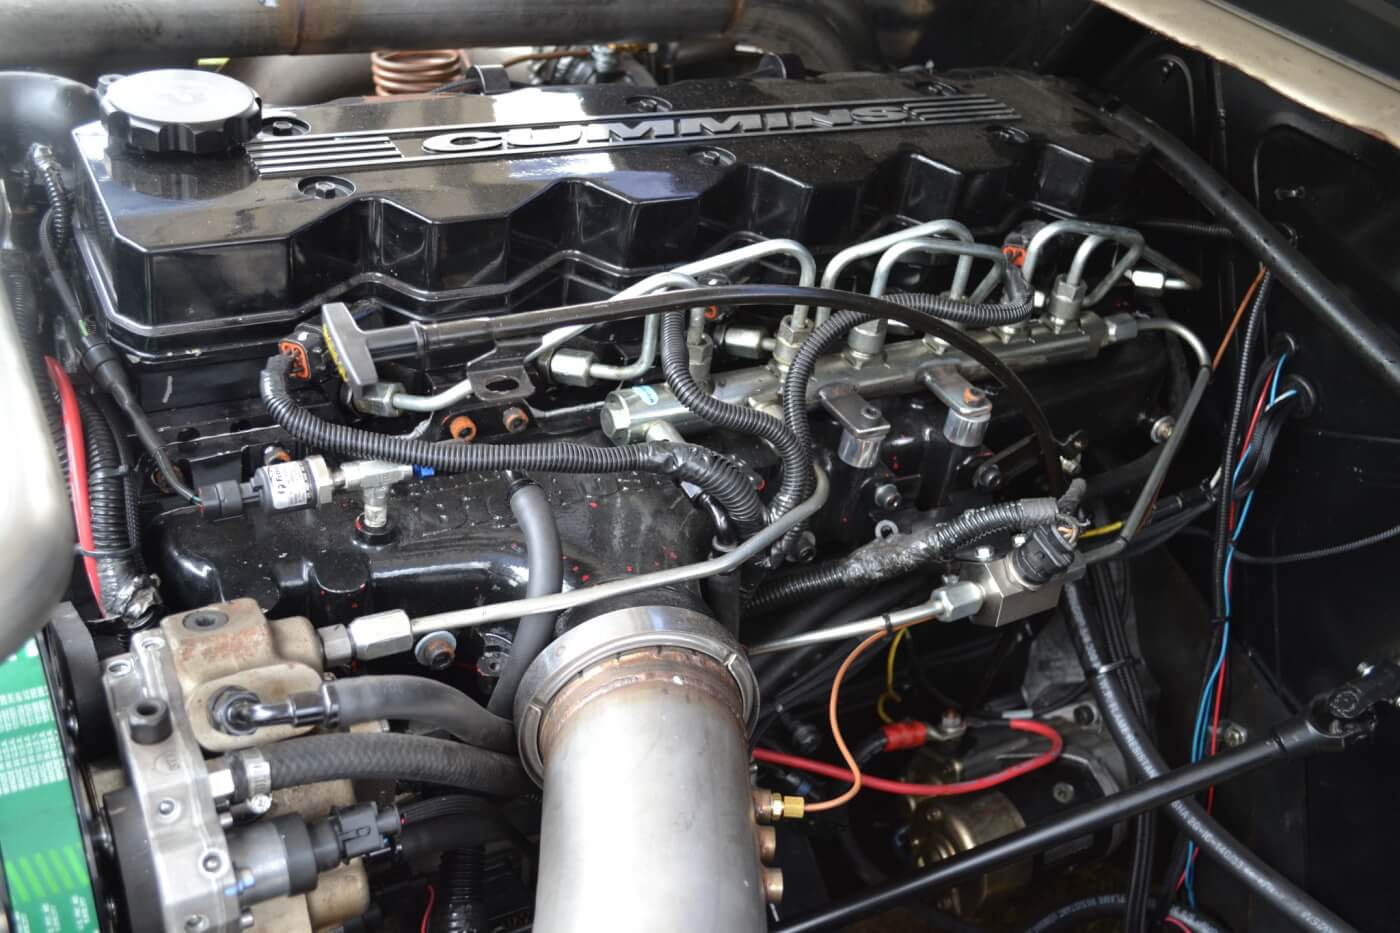 A Banks Big Hoss side-draft intake was incorporated into the build, and provides a restriction-free path for airflow at triple-digit boost numbers.